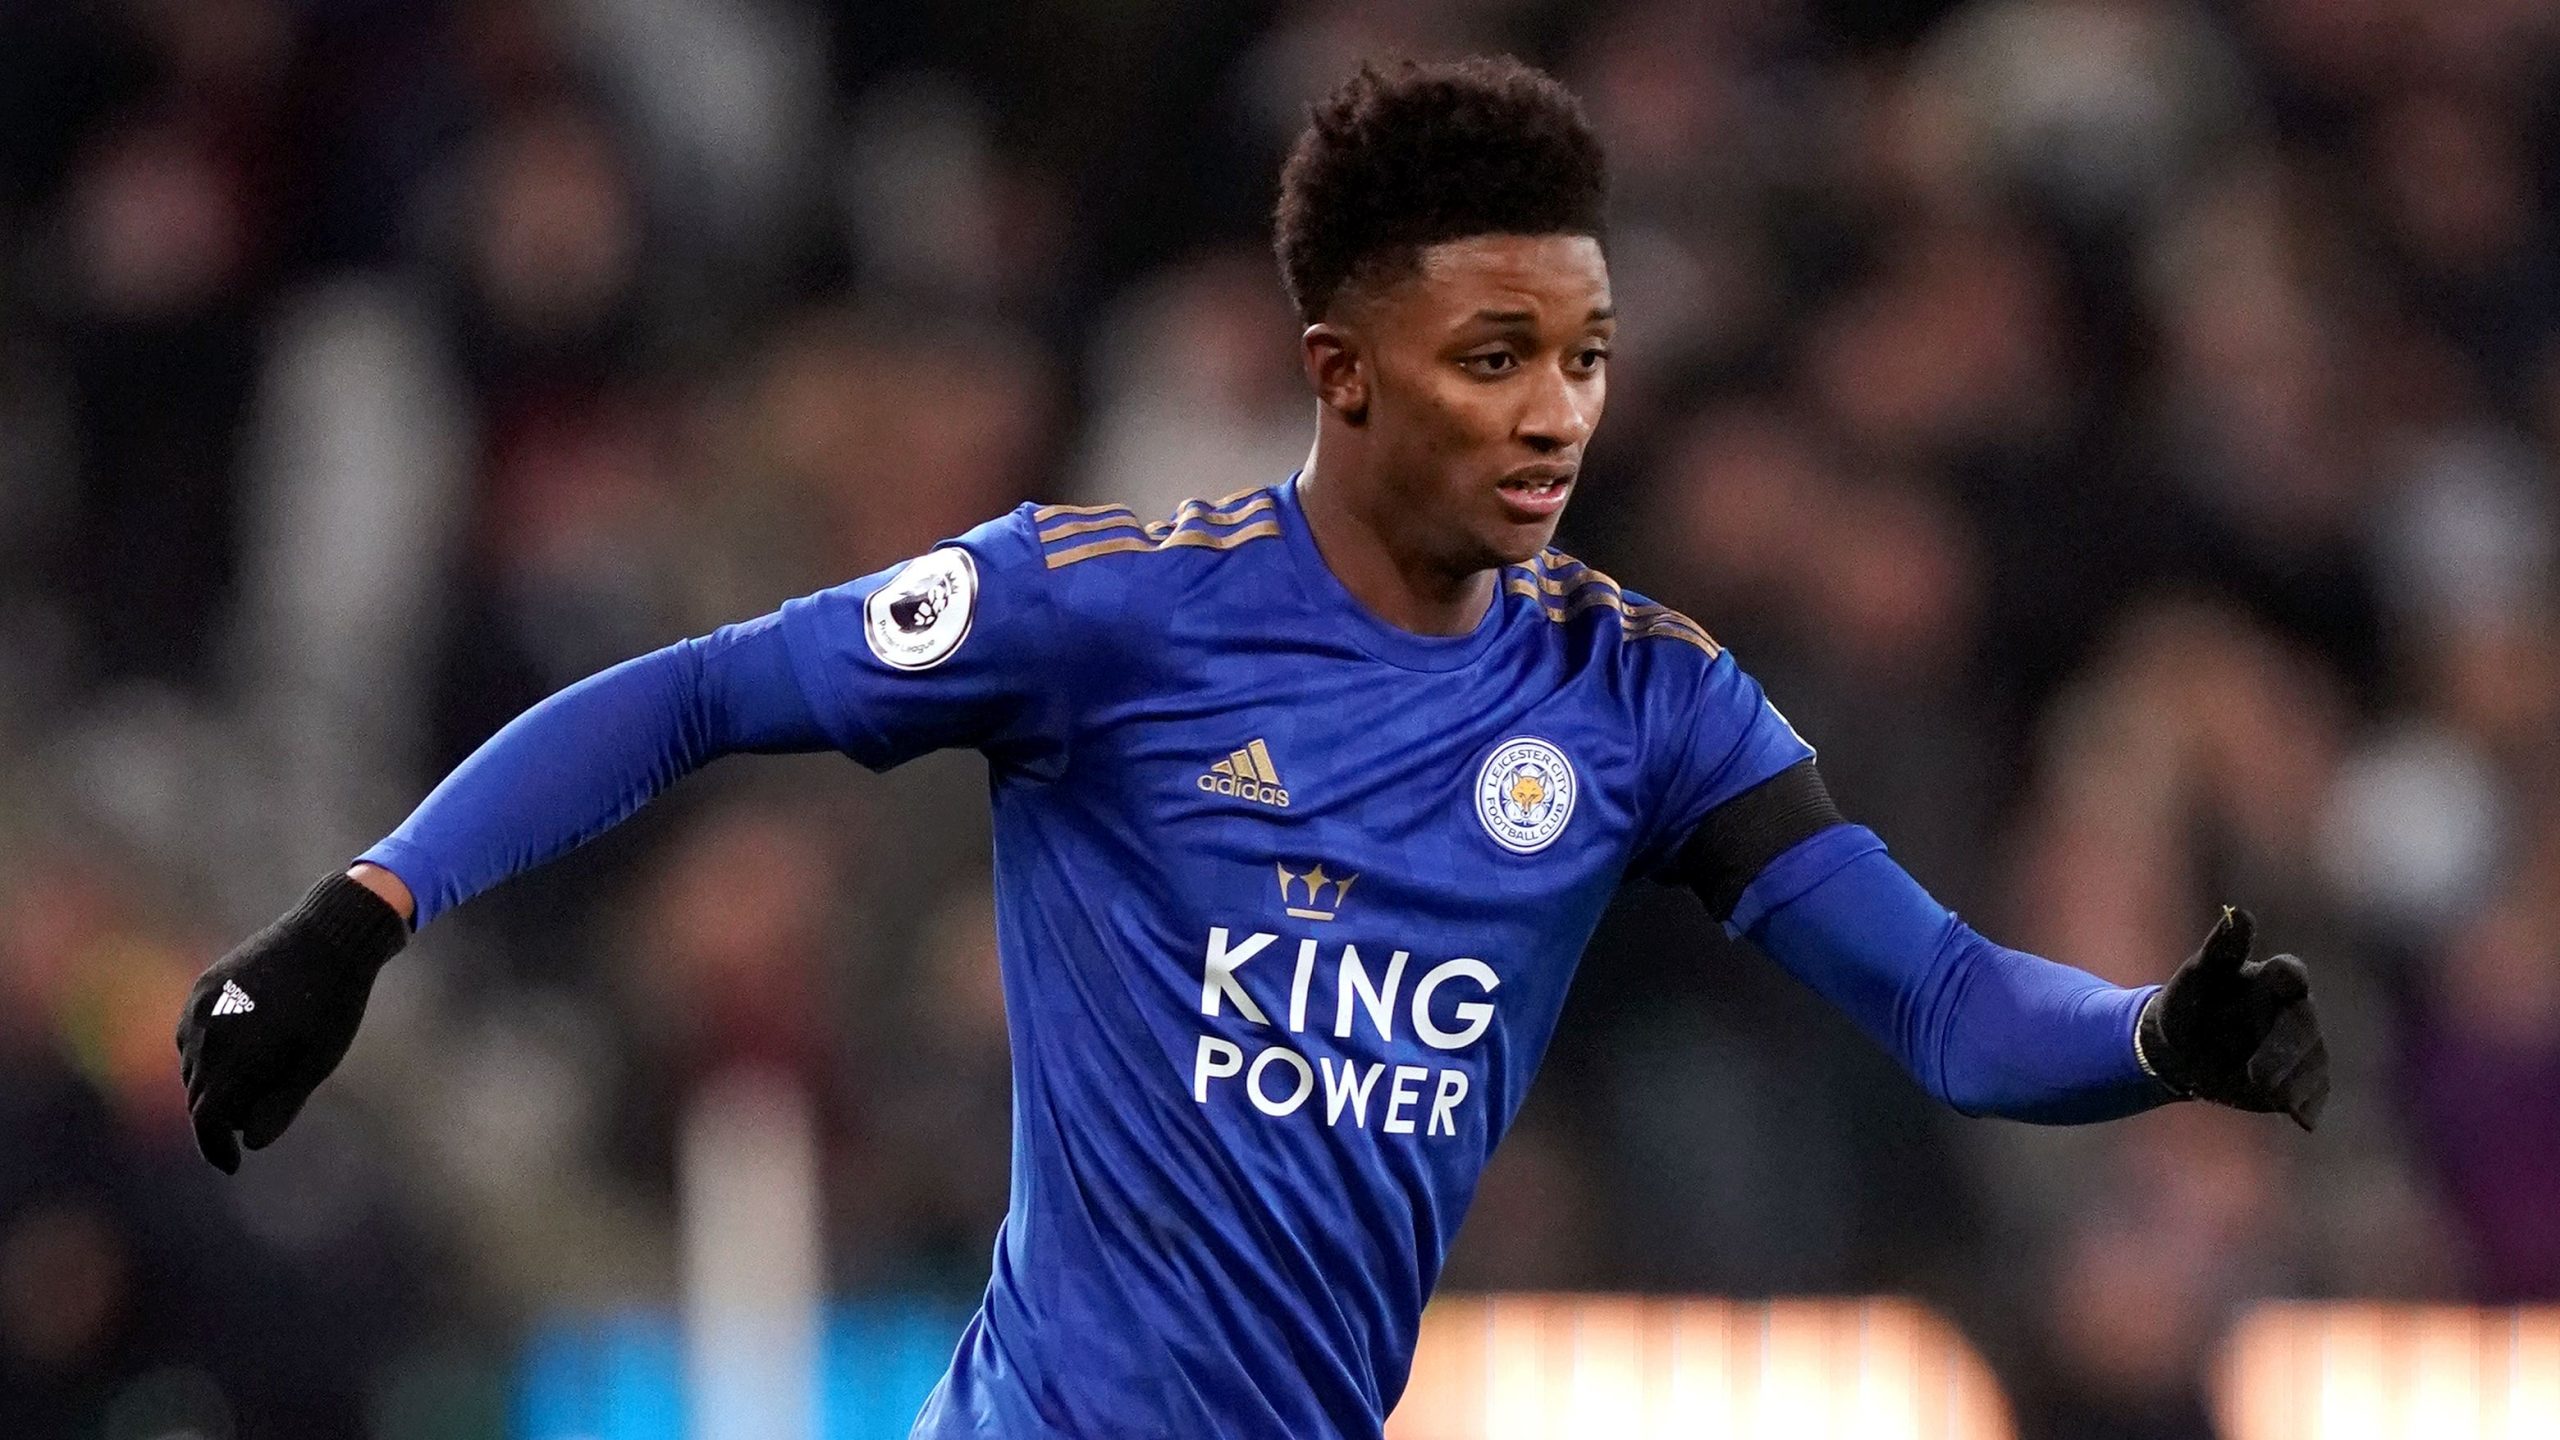 New signing Demarai Gray vows to help get Everton 'right up there'